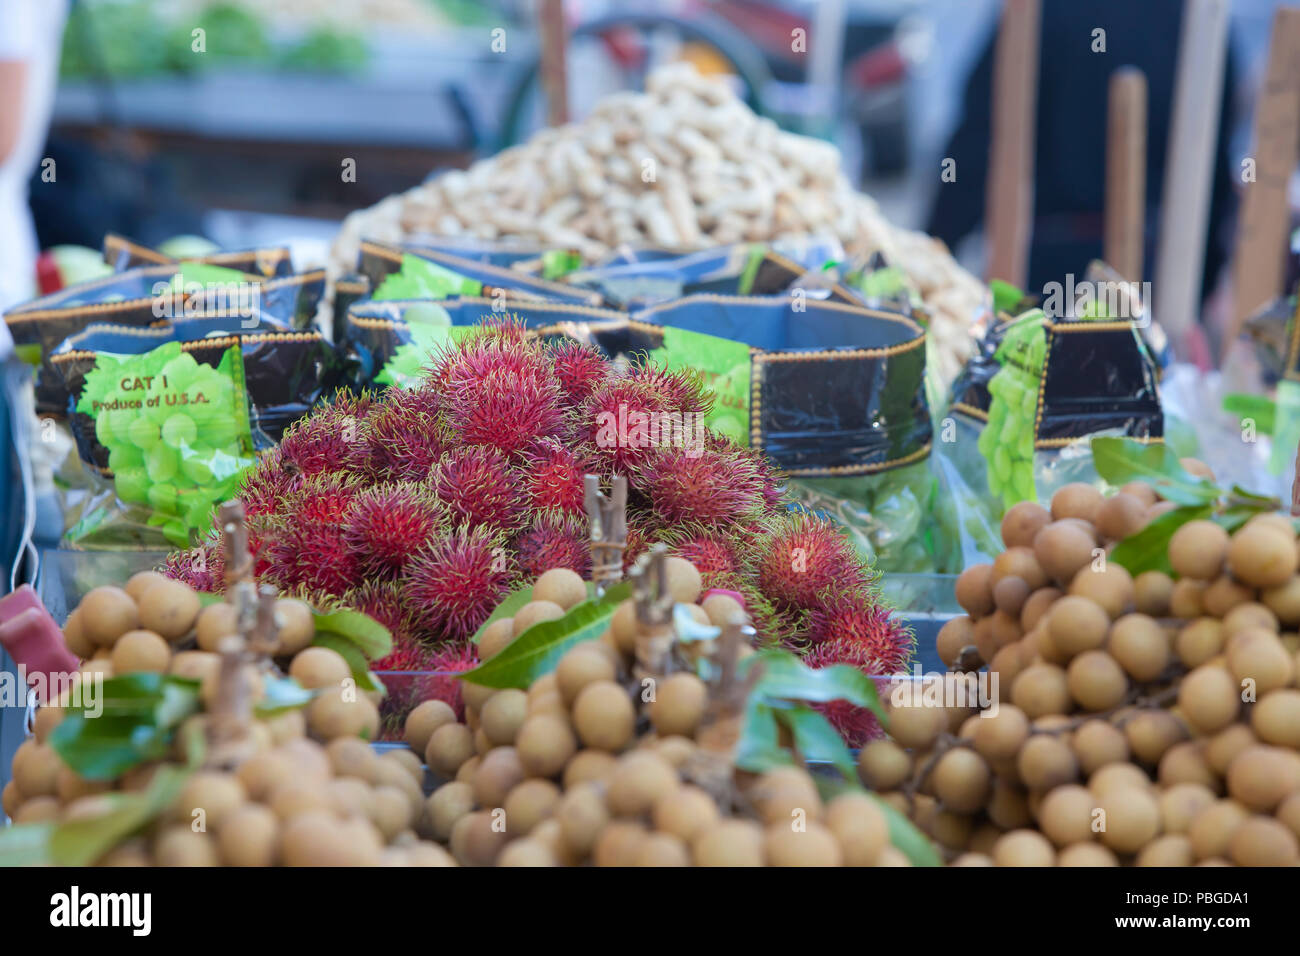 Rambutan and other fruit for sale at an outdoor stand in Chinatown, New York Stock Photo